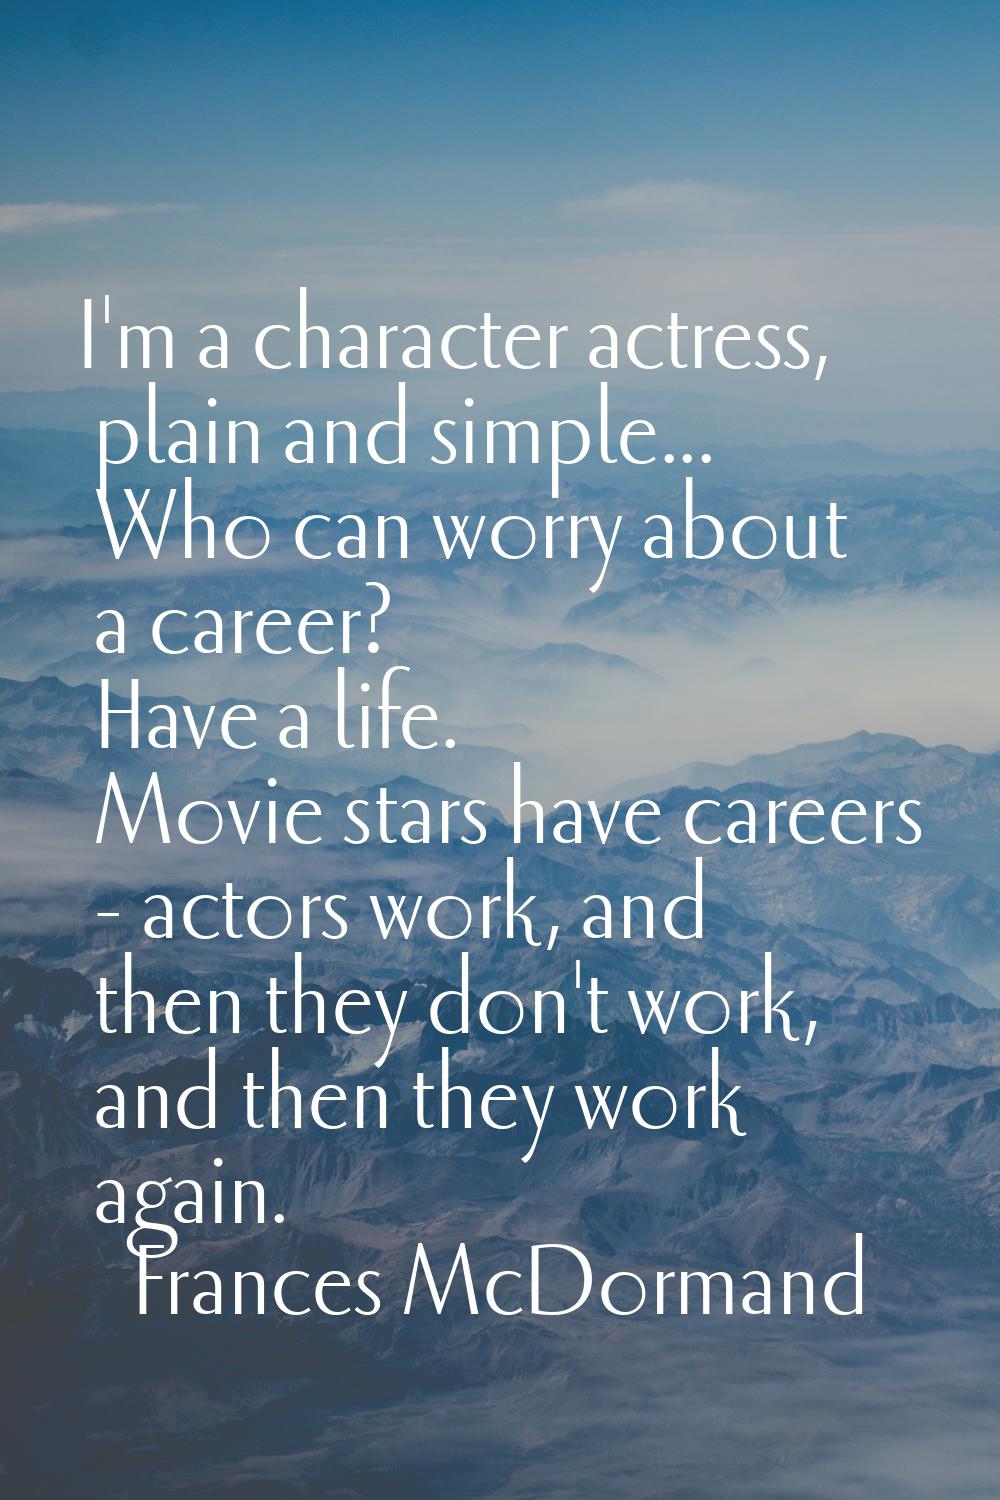 I'm a character actress, plain and simple... Who can worry about a career? Have a life. Movie stars